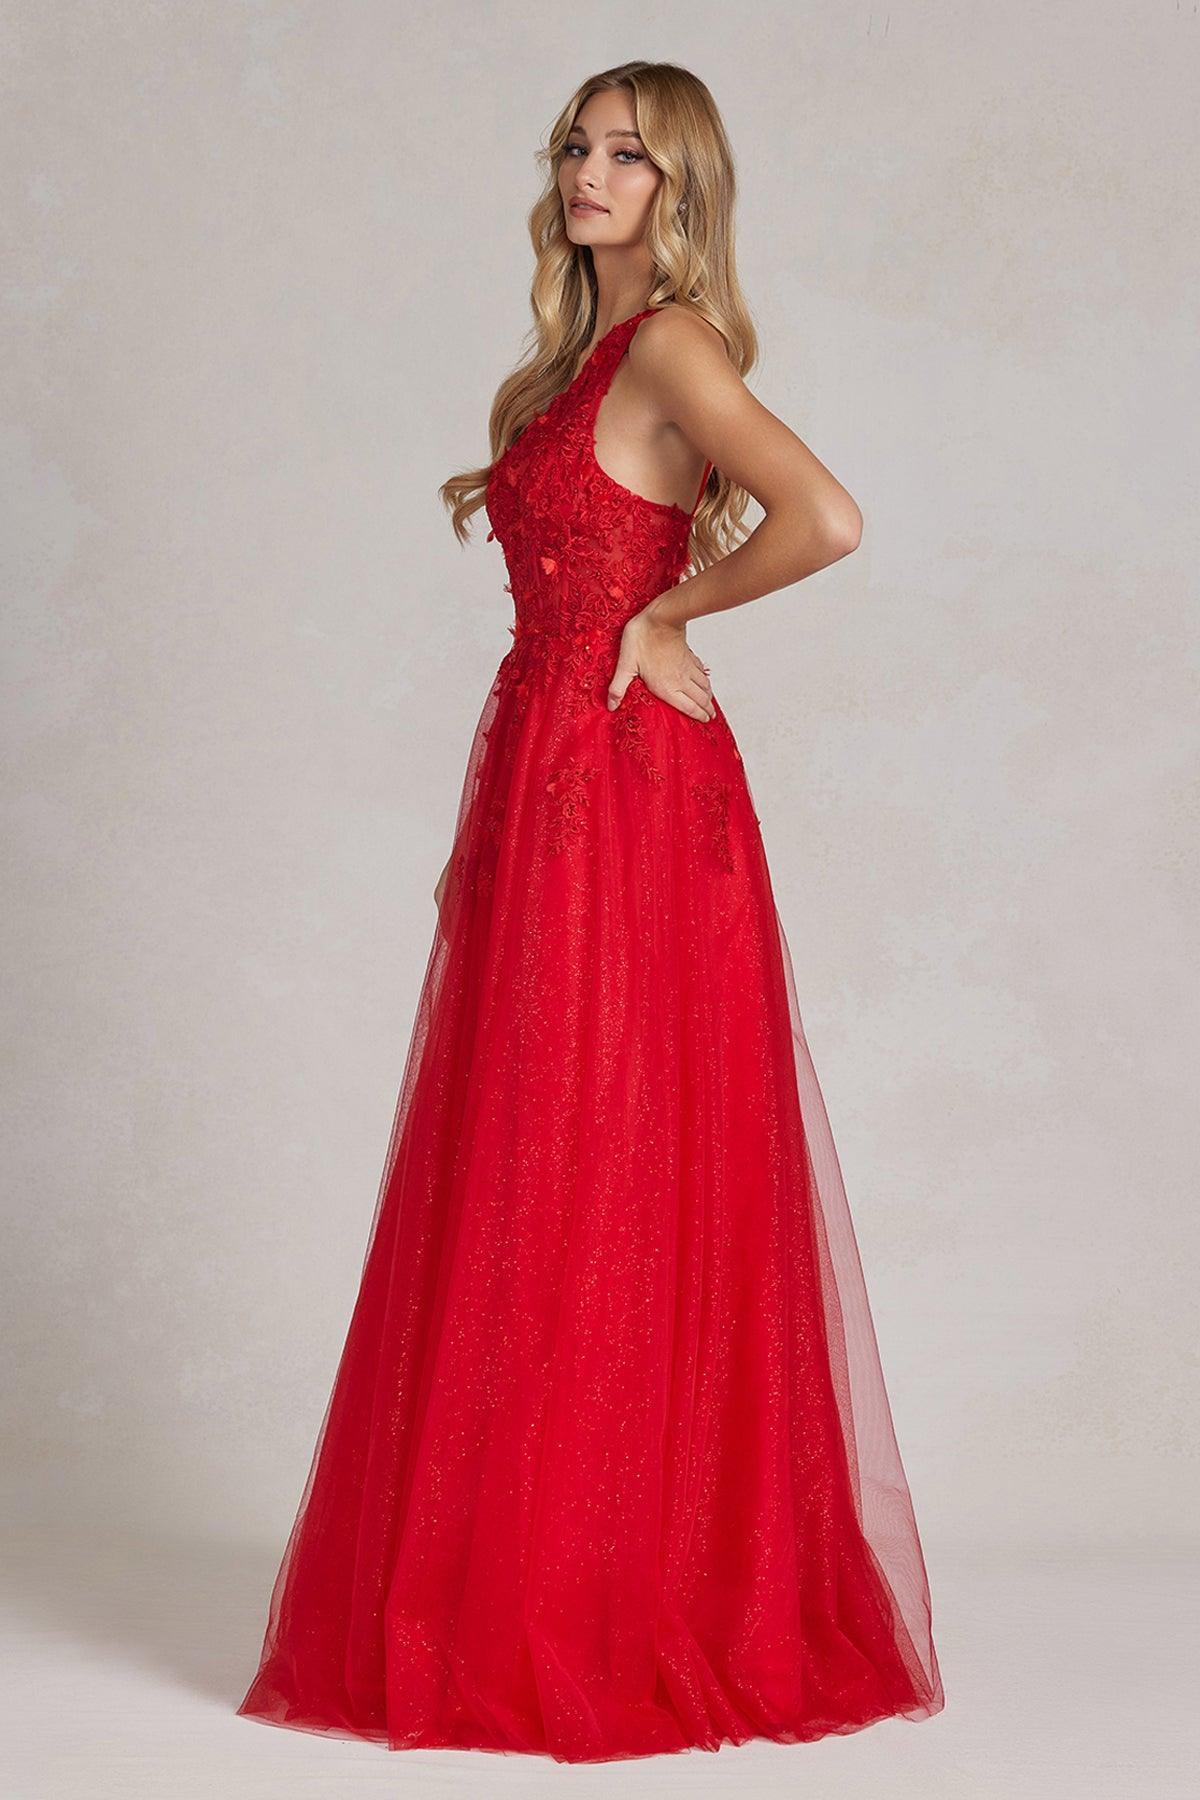 Nox Anabel T1143 Long One Shoulder A Line Prom Gown Red